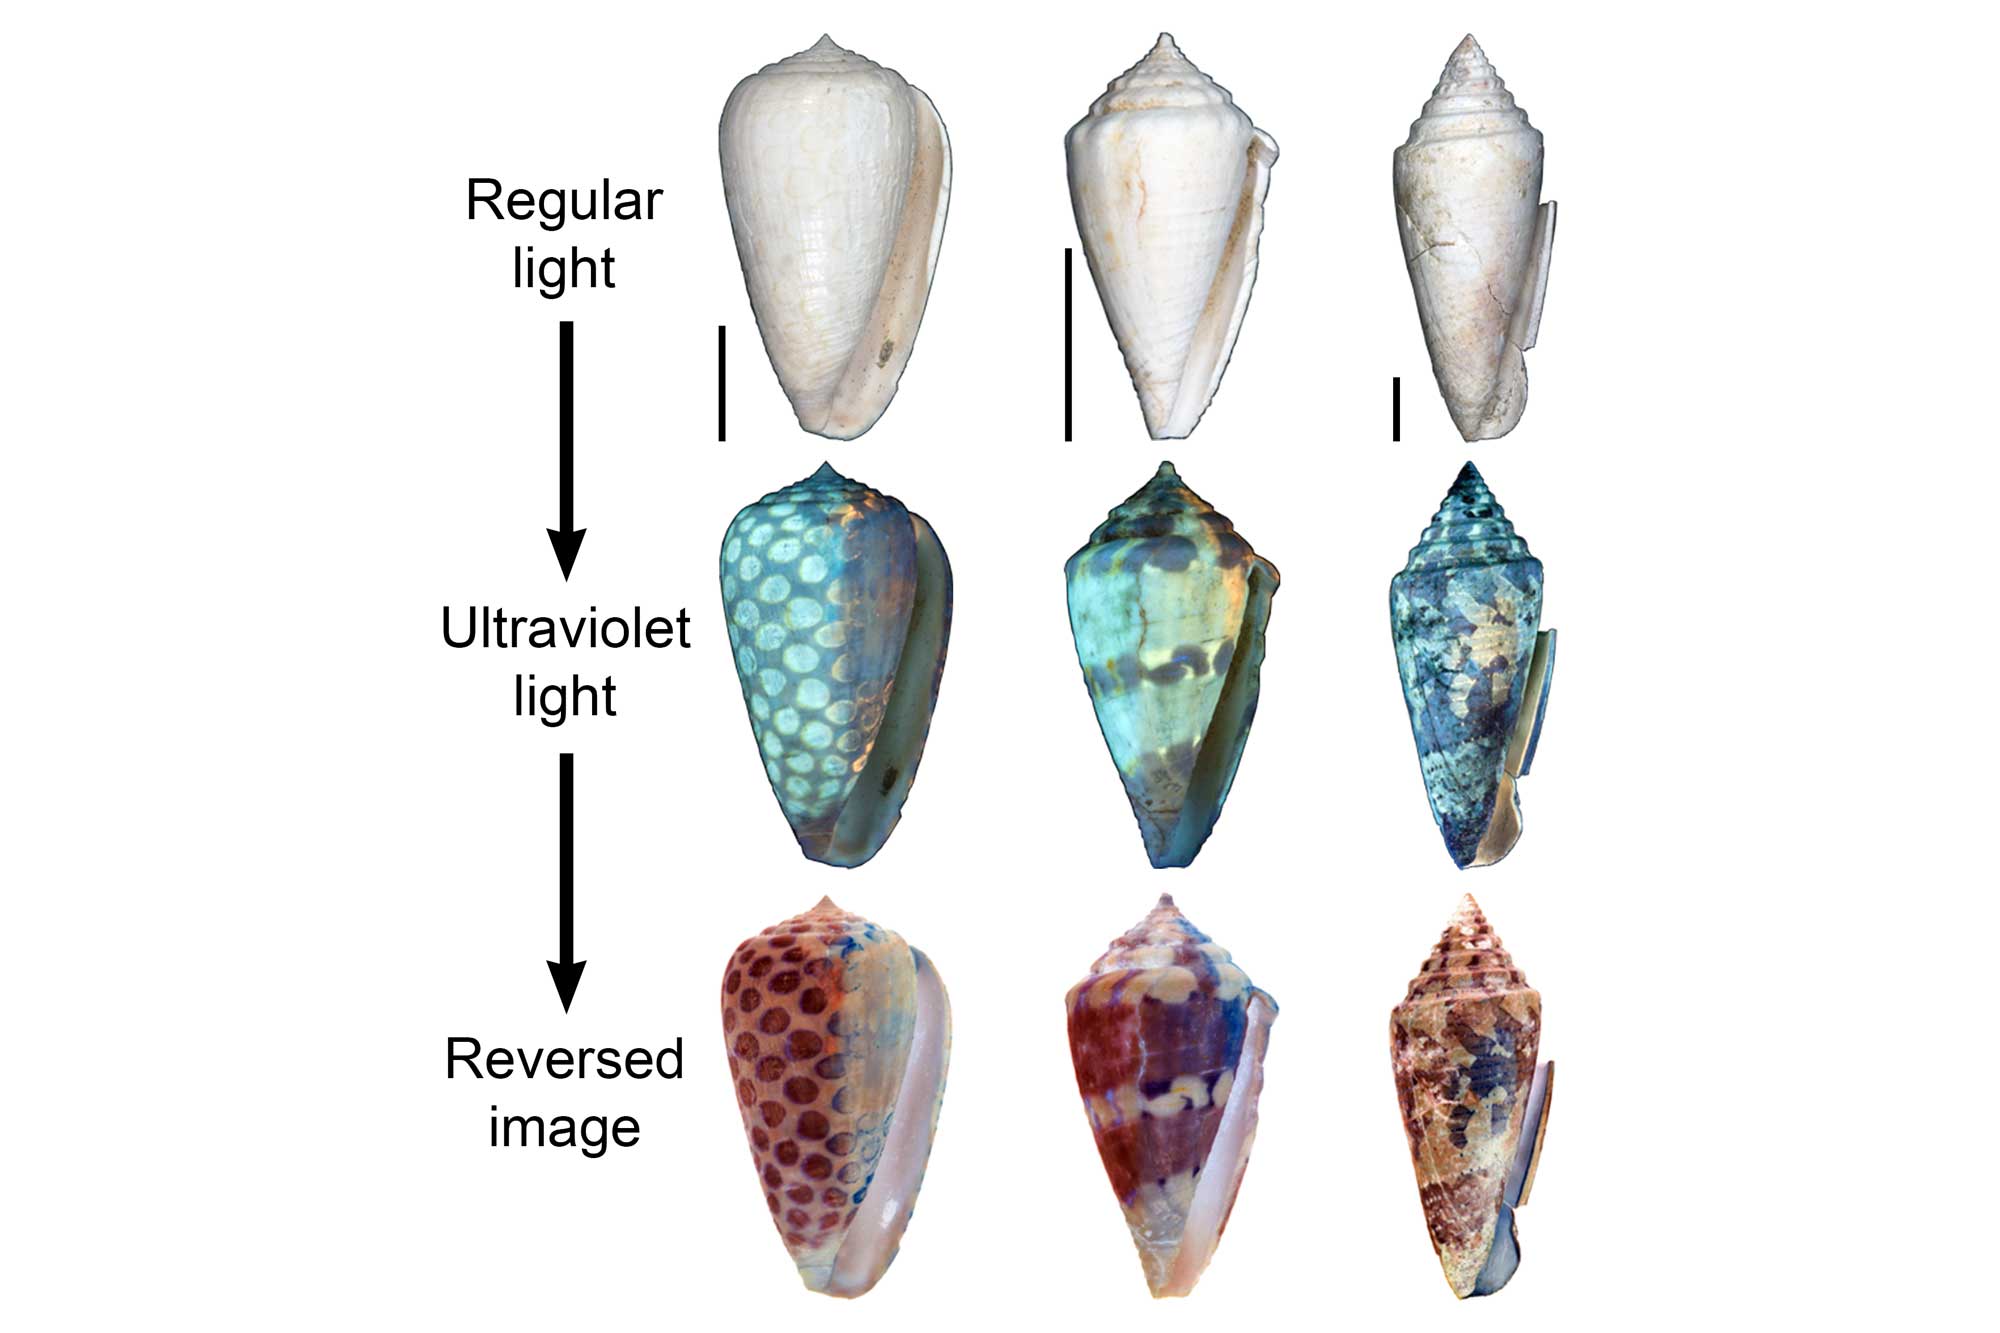 Image shows three specimens of cone snails under regular and ultraviolet light, which reveals their original coloration patterns.